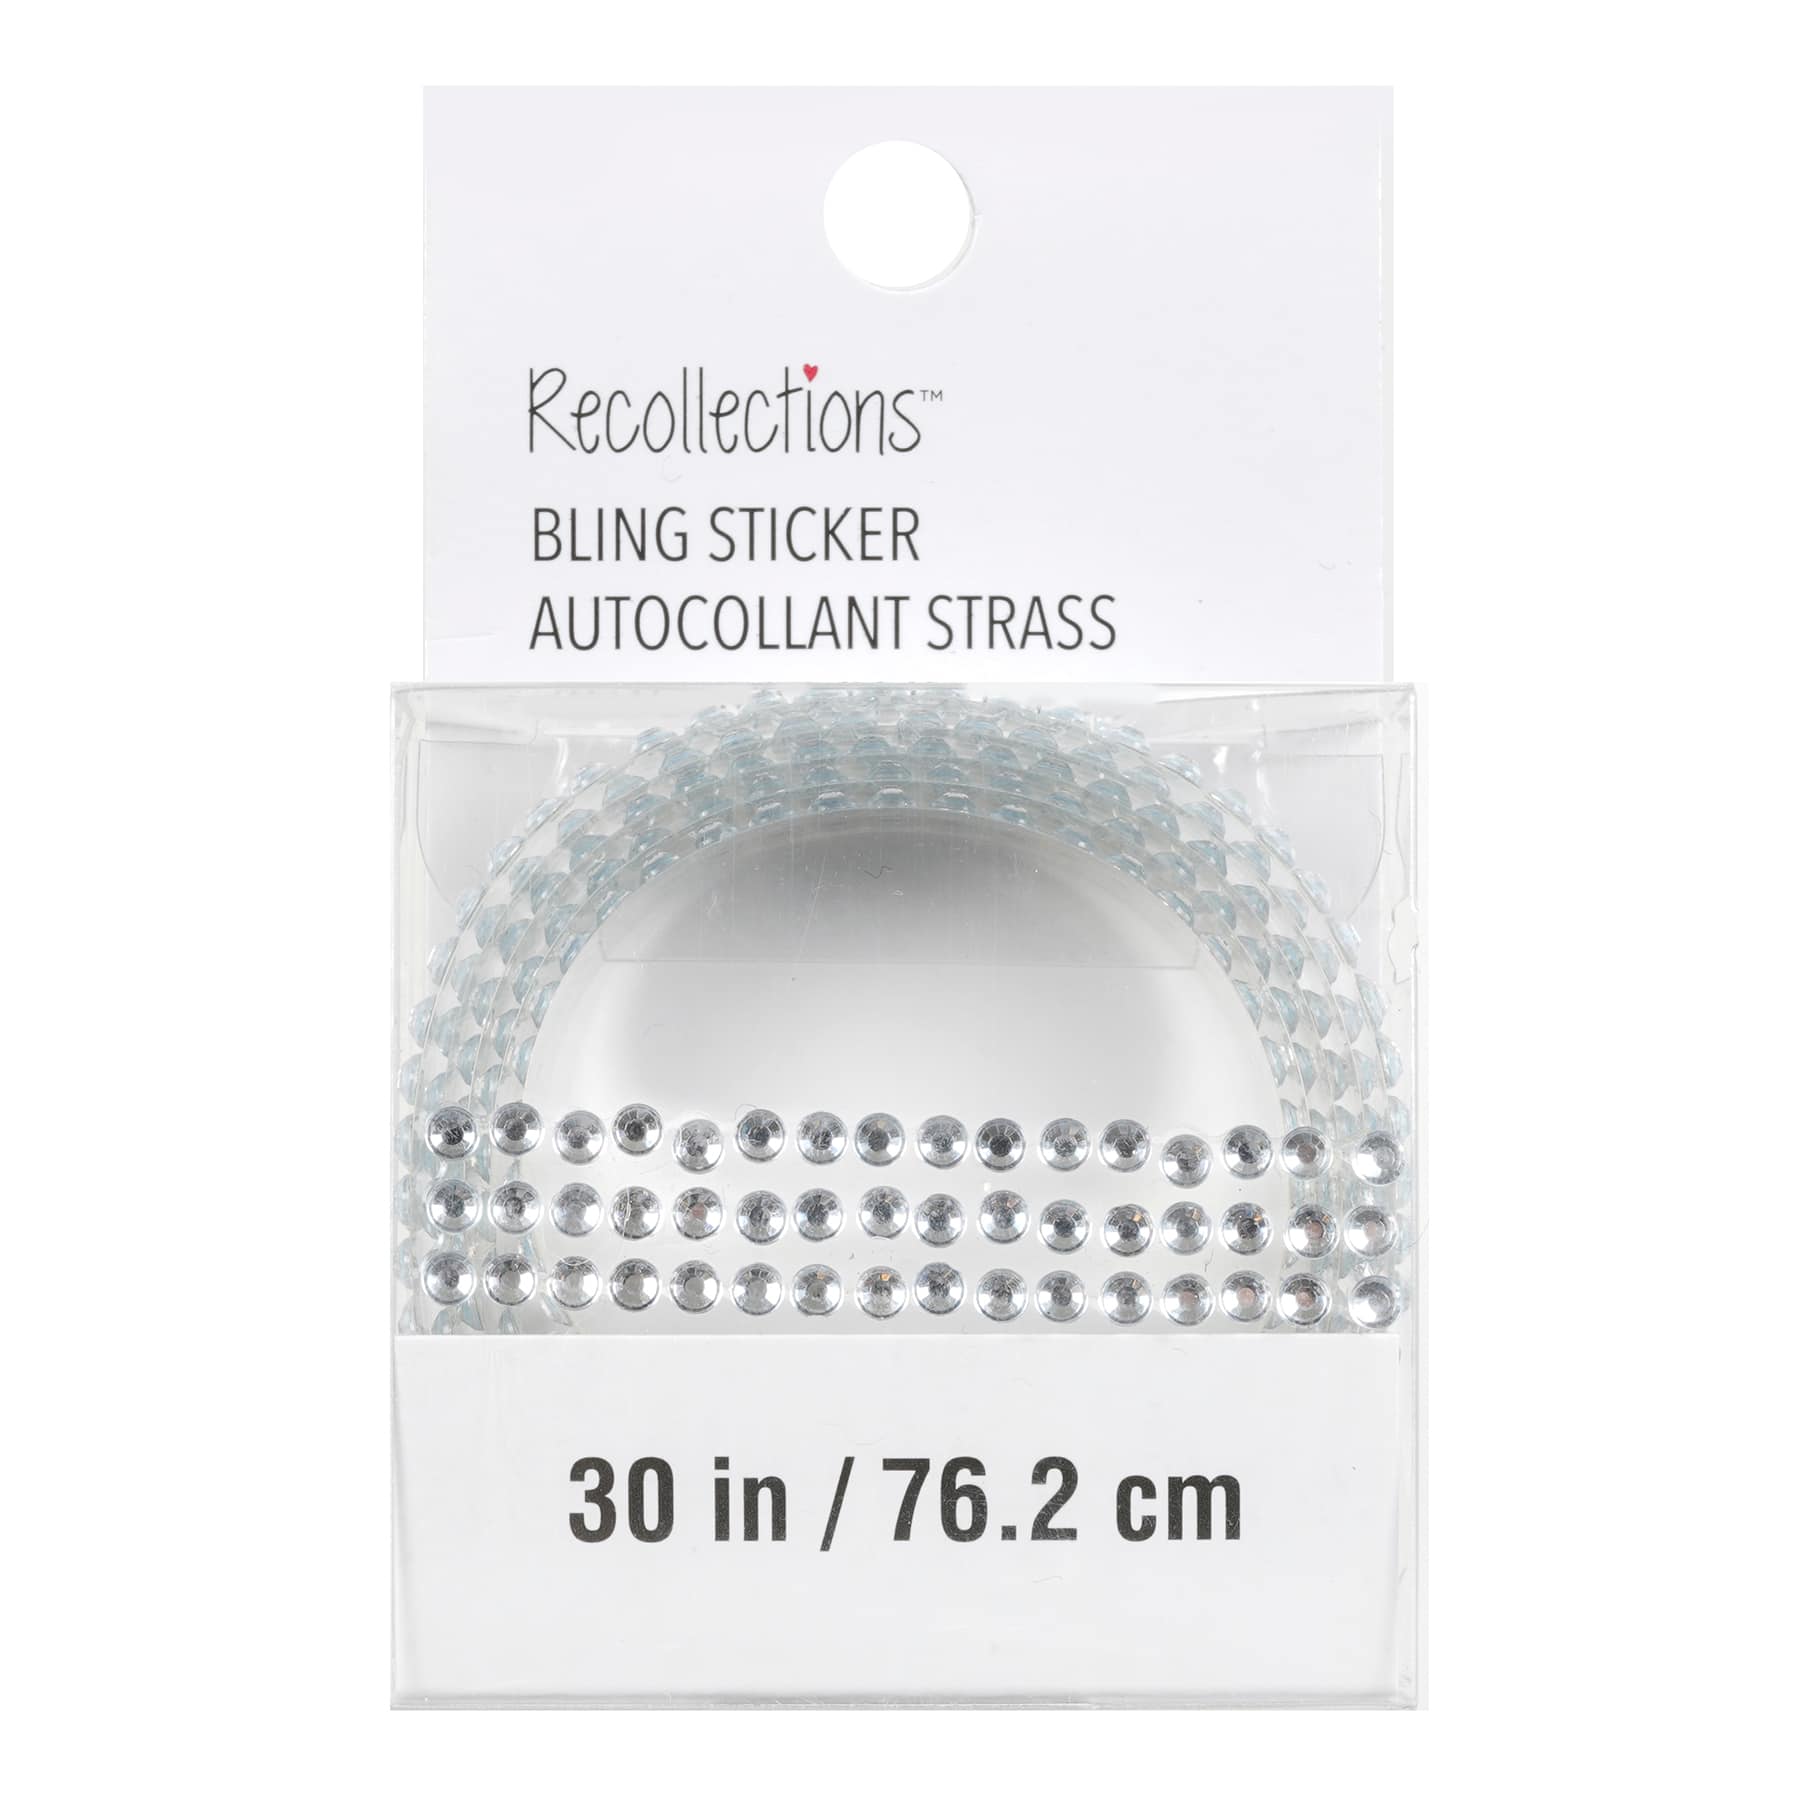 Bling on a Roll™ Rainbow Rhinestones by Recollections™